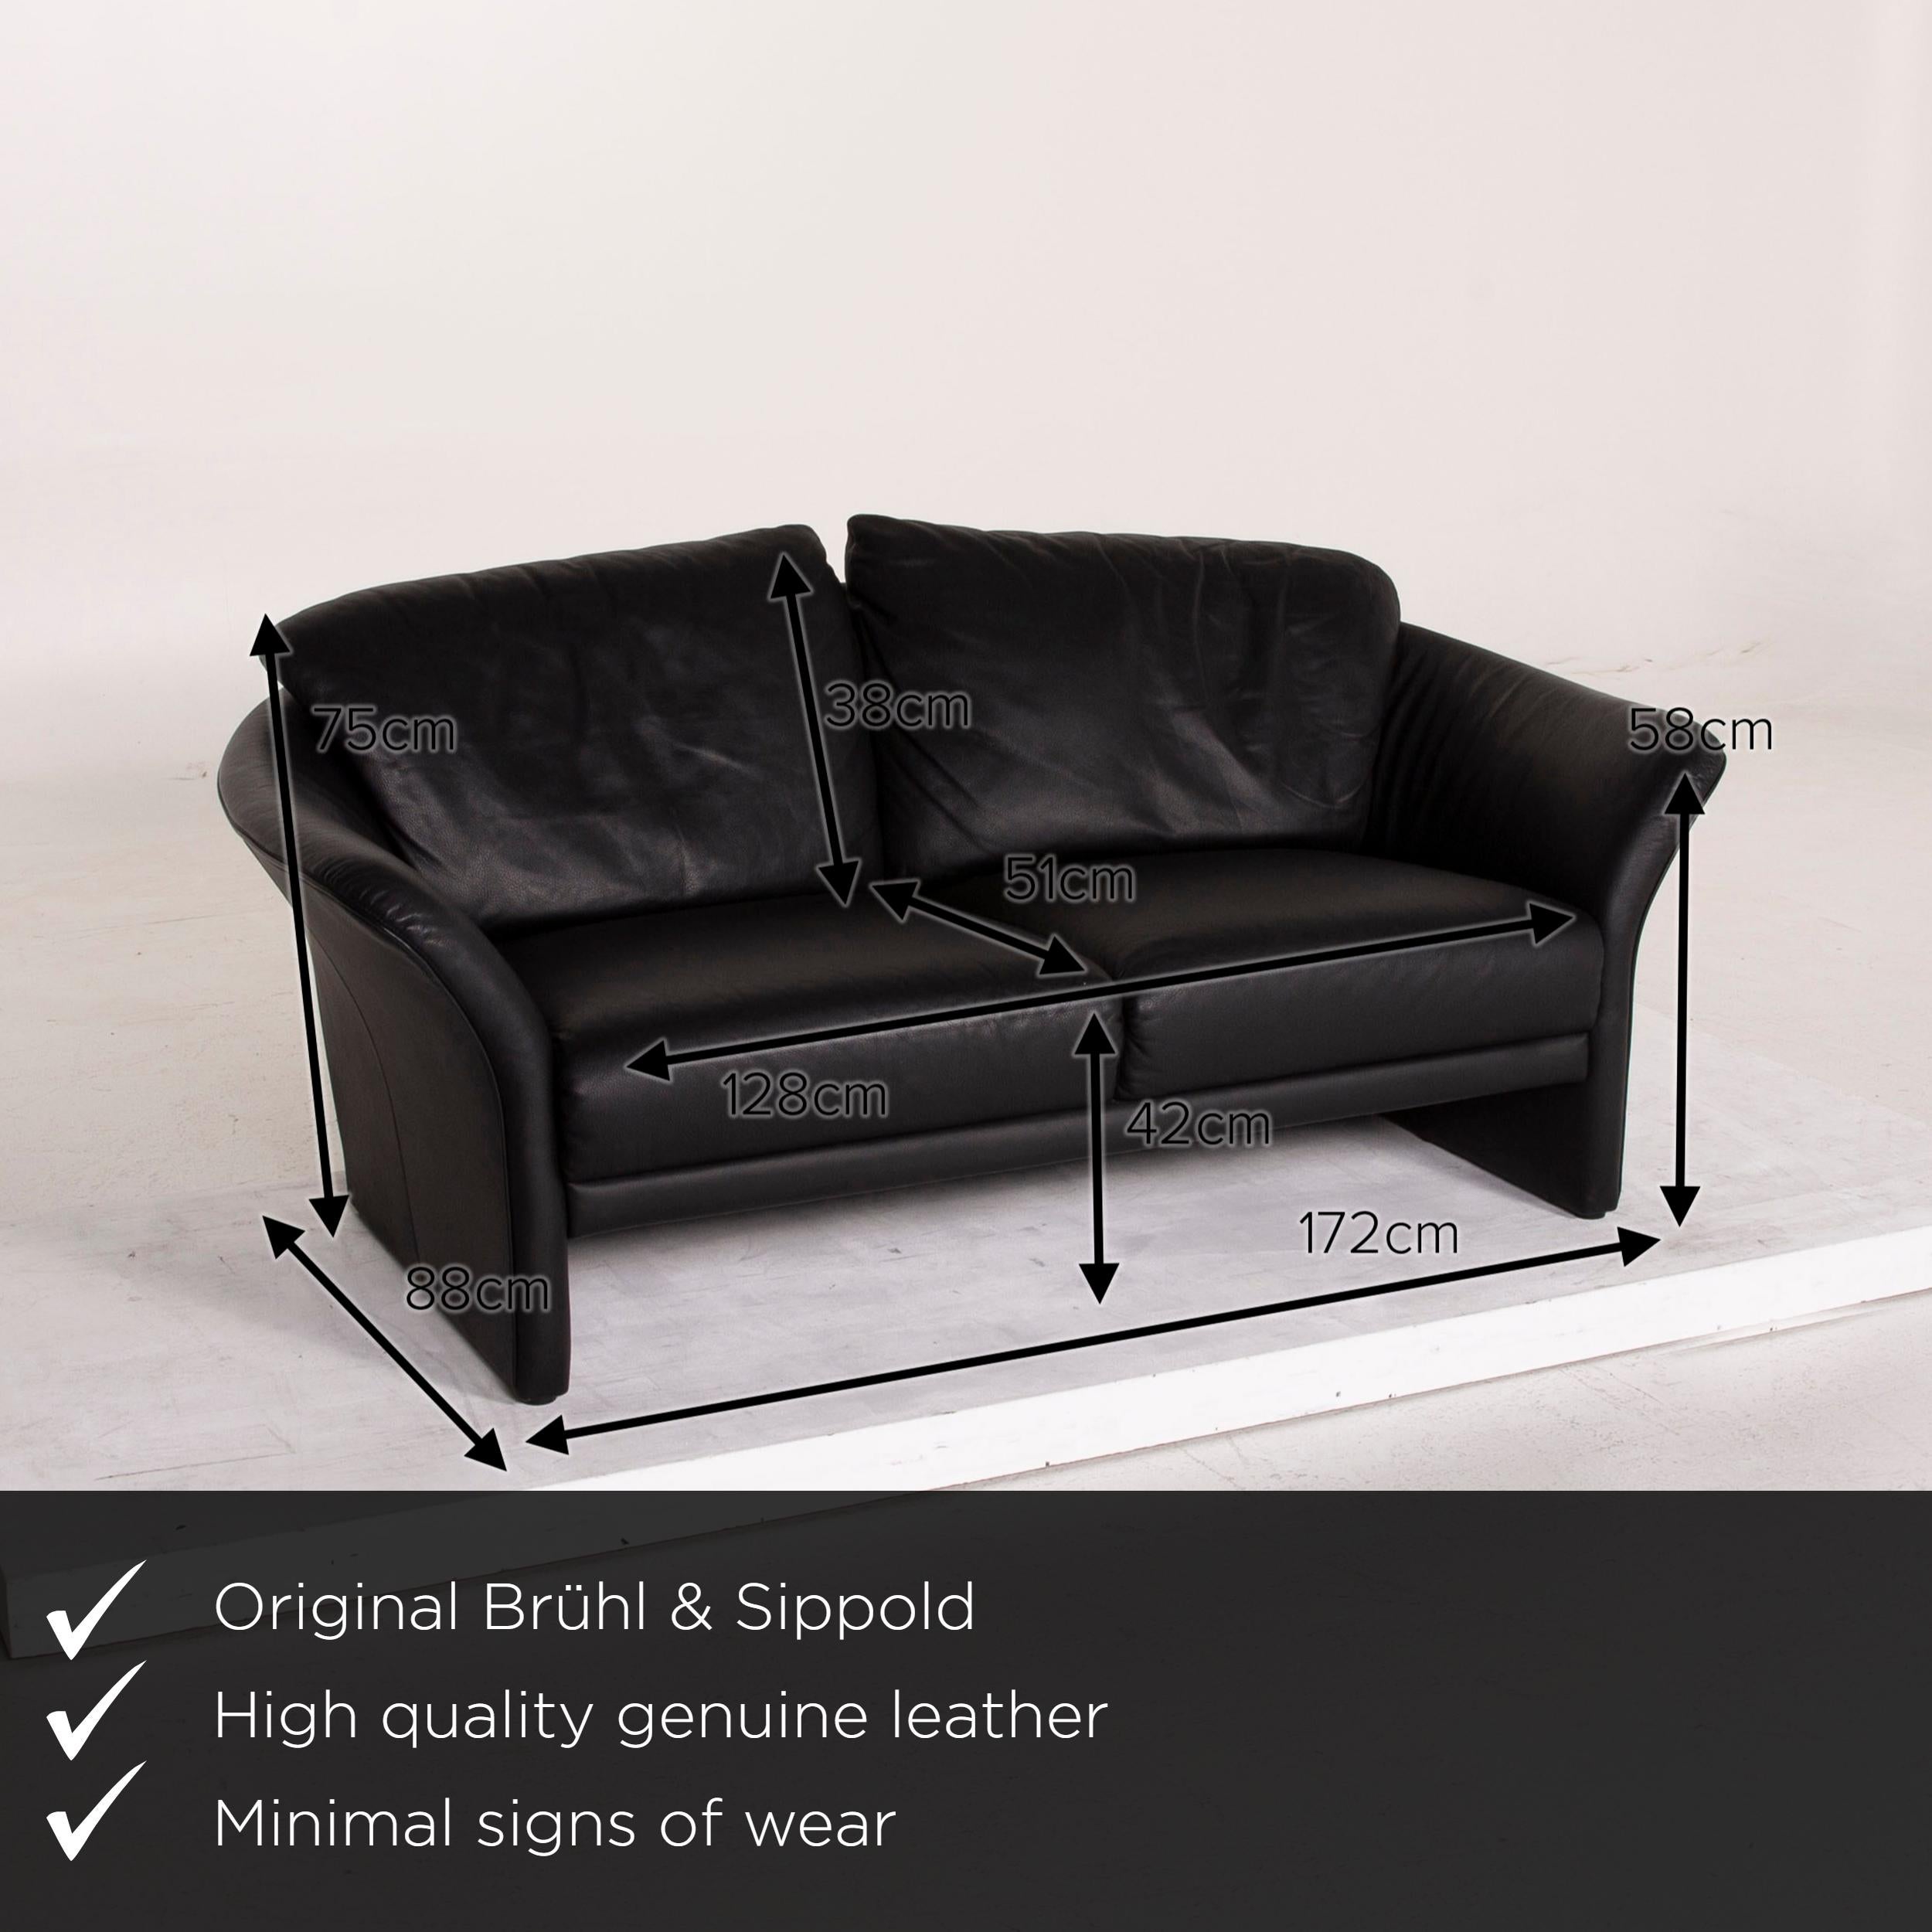 We present to you a Brühl & Sippold boa leather sofa set black two-seat armchair.

 

 Product measurements in centimeters:
 

Depth 88
Width 172
Height 75
Seat height 42
Rest height 58
Seat depth 51
Seat width 128
Back height 38.